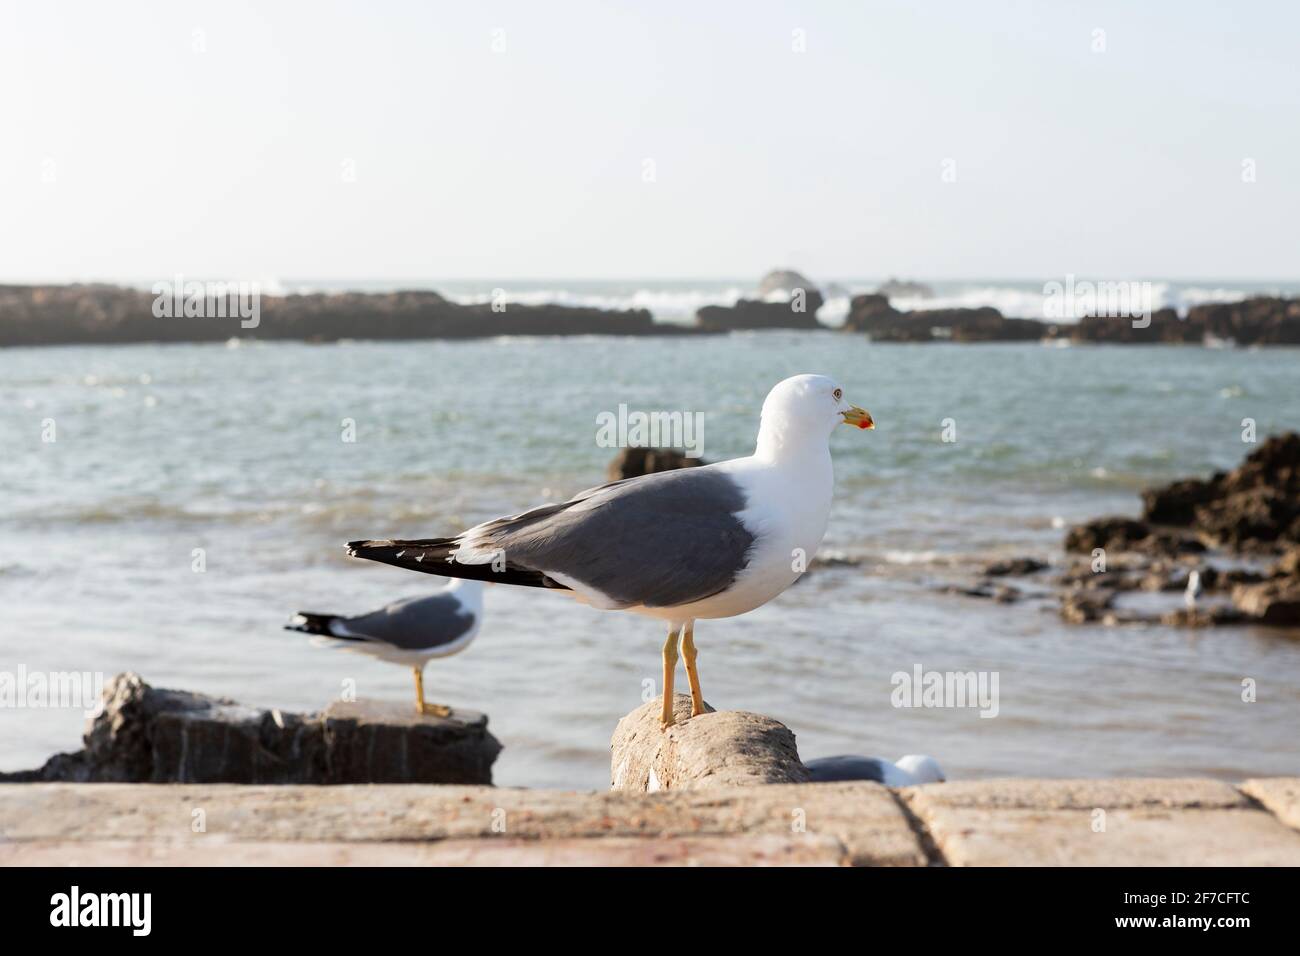 Seagulls flying at the port of Essaouira, Morocco Stock Photo